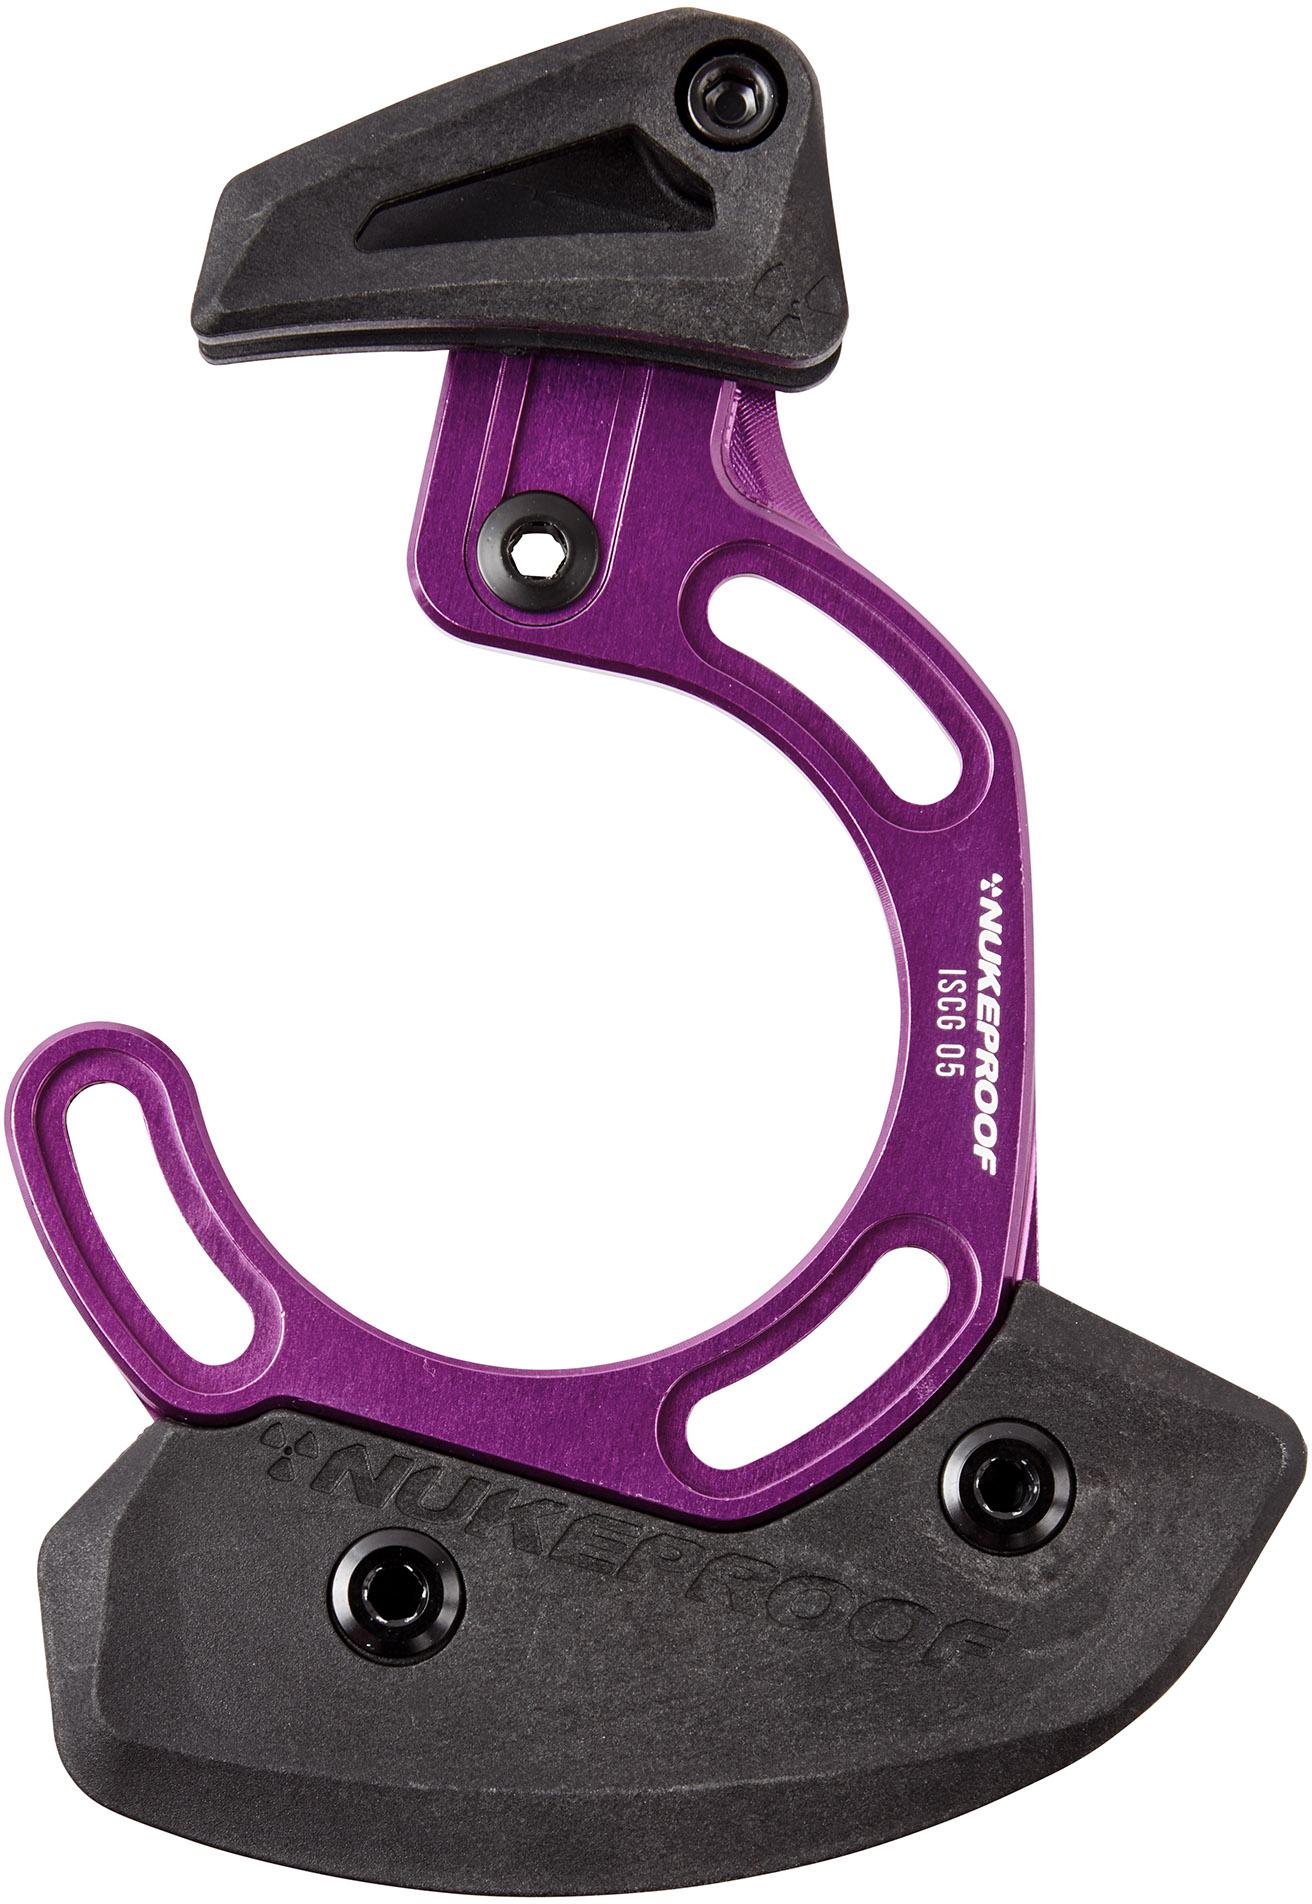 Nukeproof Chain Guide Iscg 05 Top Guide With Bash - Purple/black